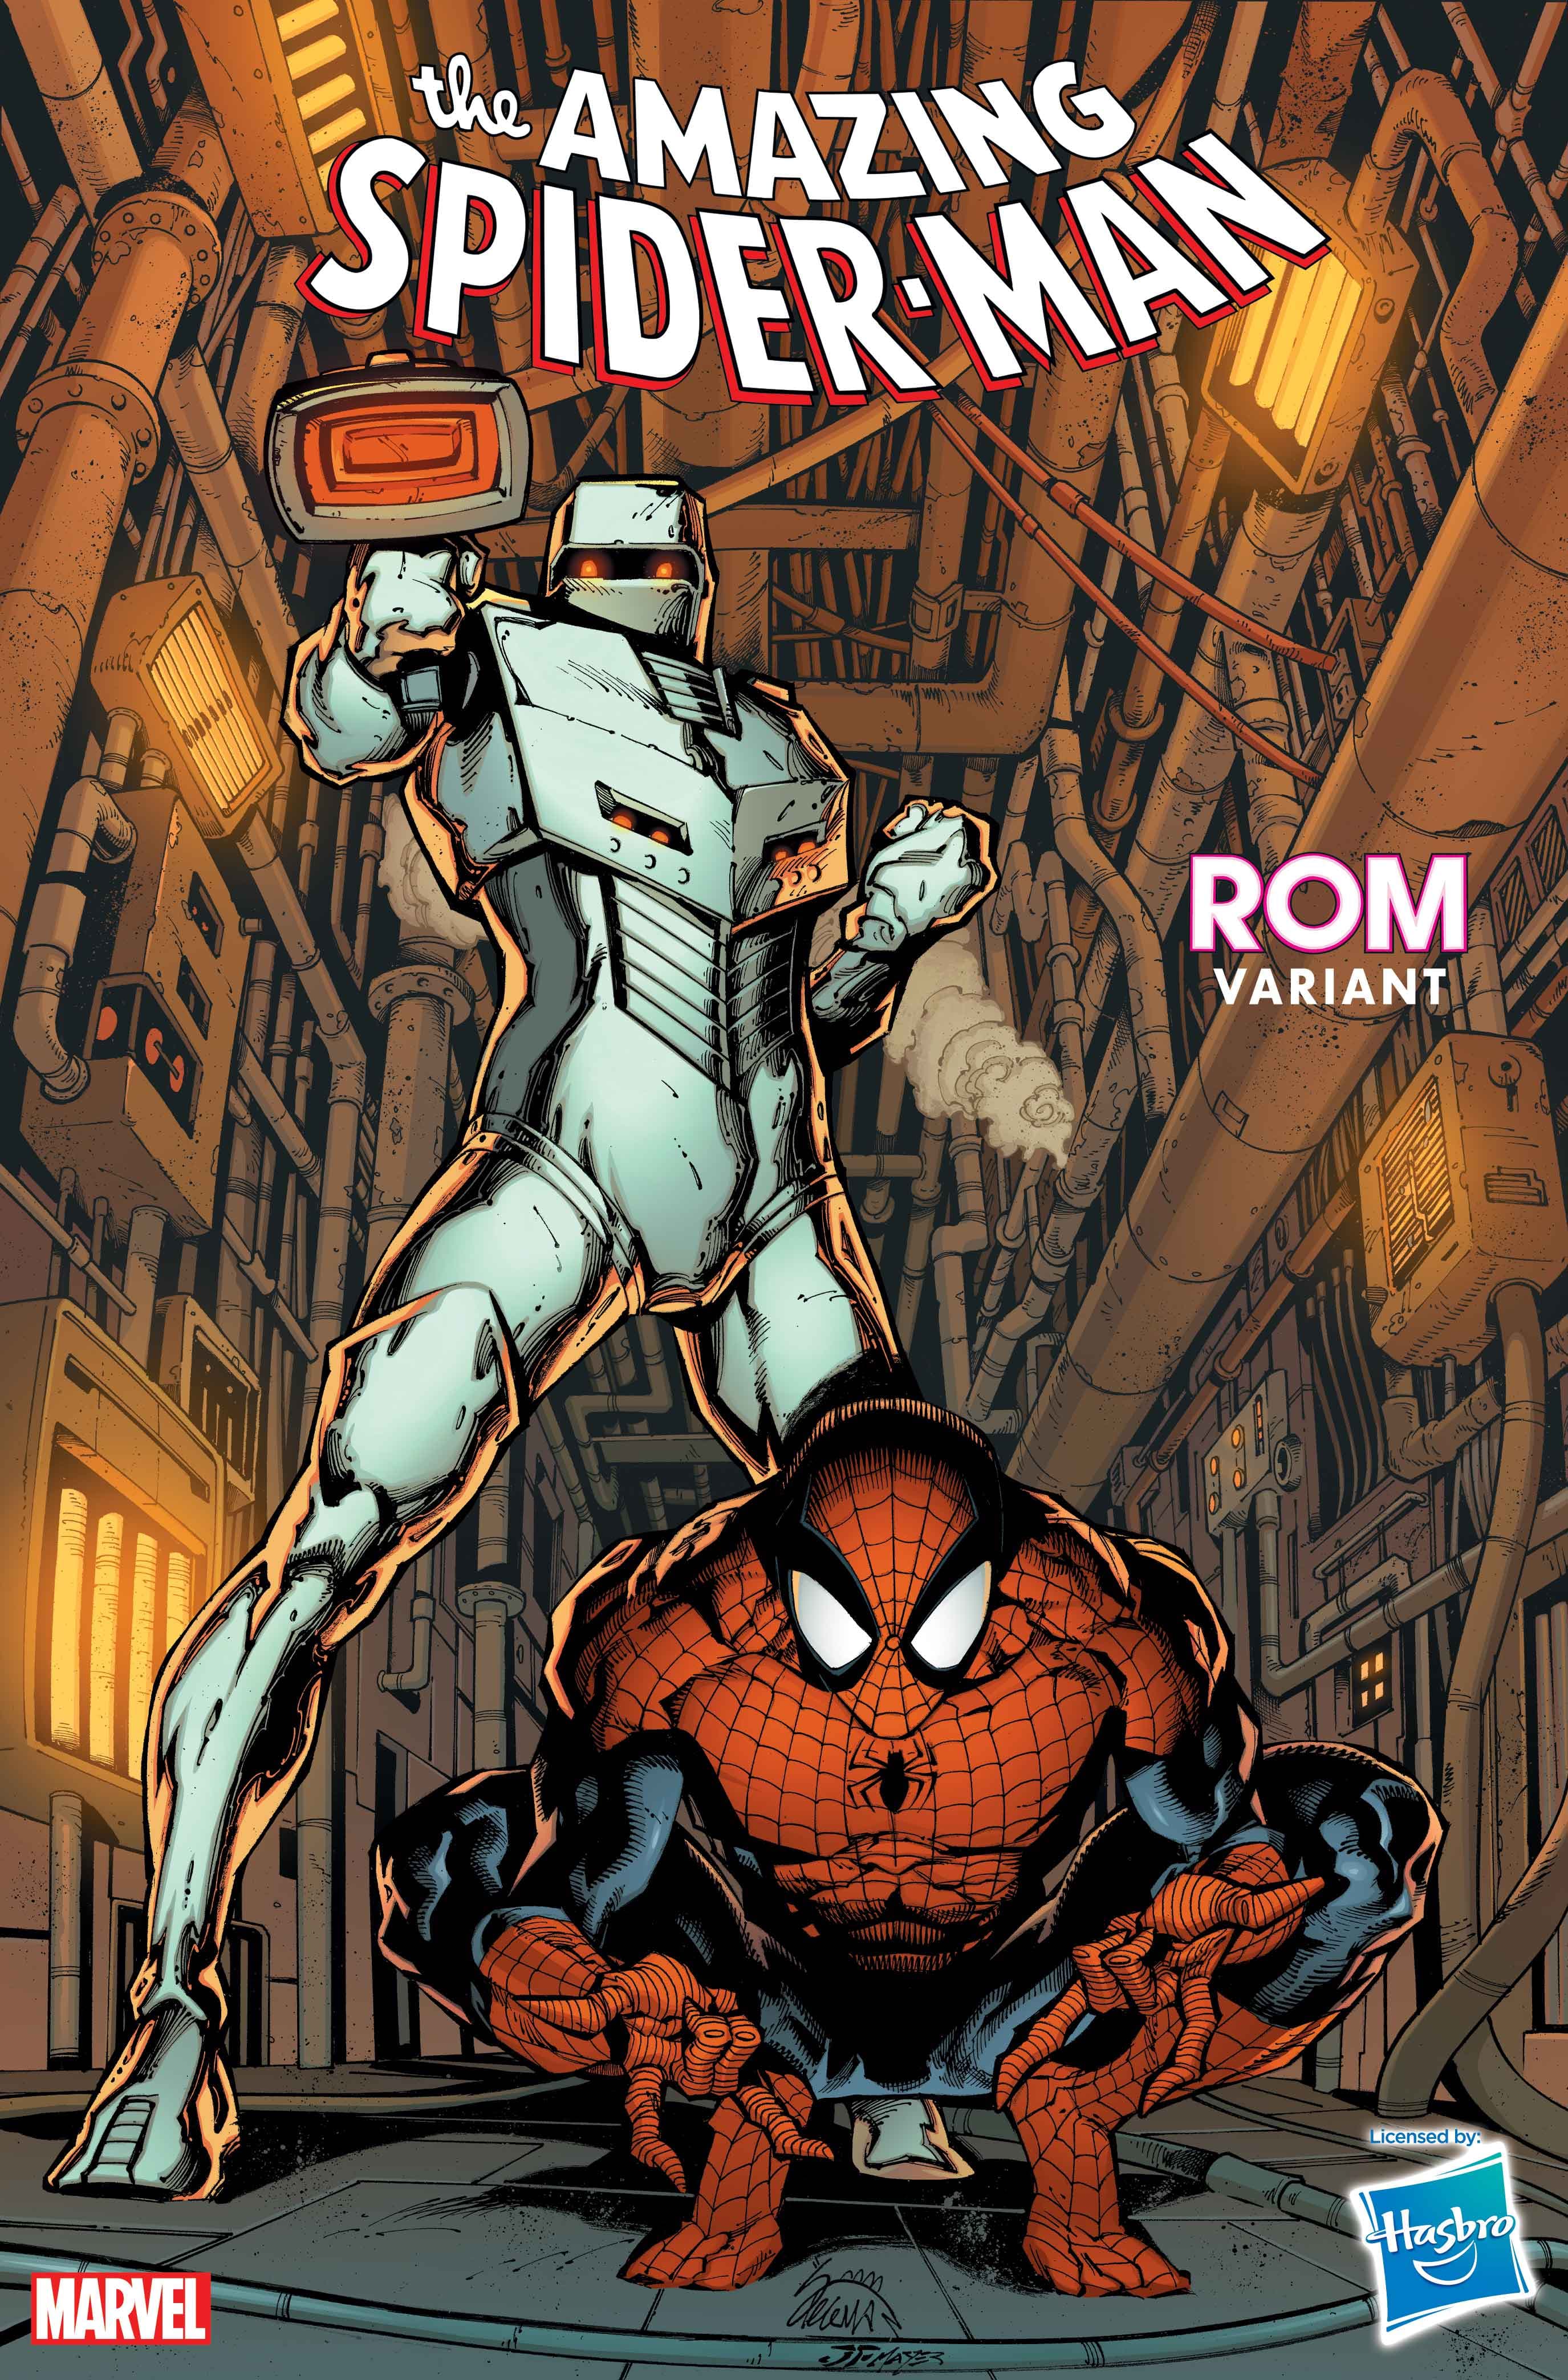 Rom the Spaceknight Adventures Across the Marvel Universe in New Covers